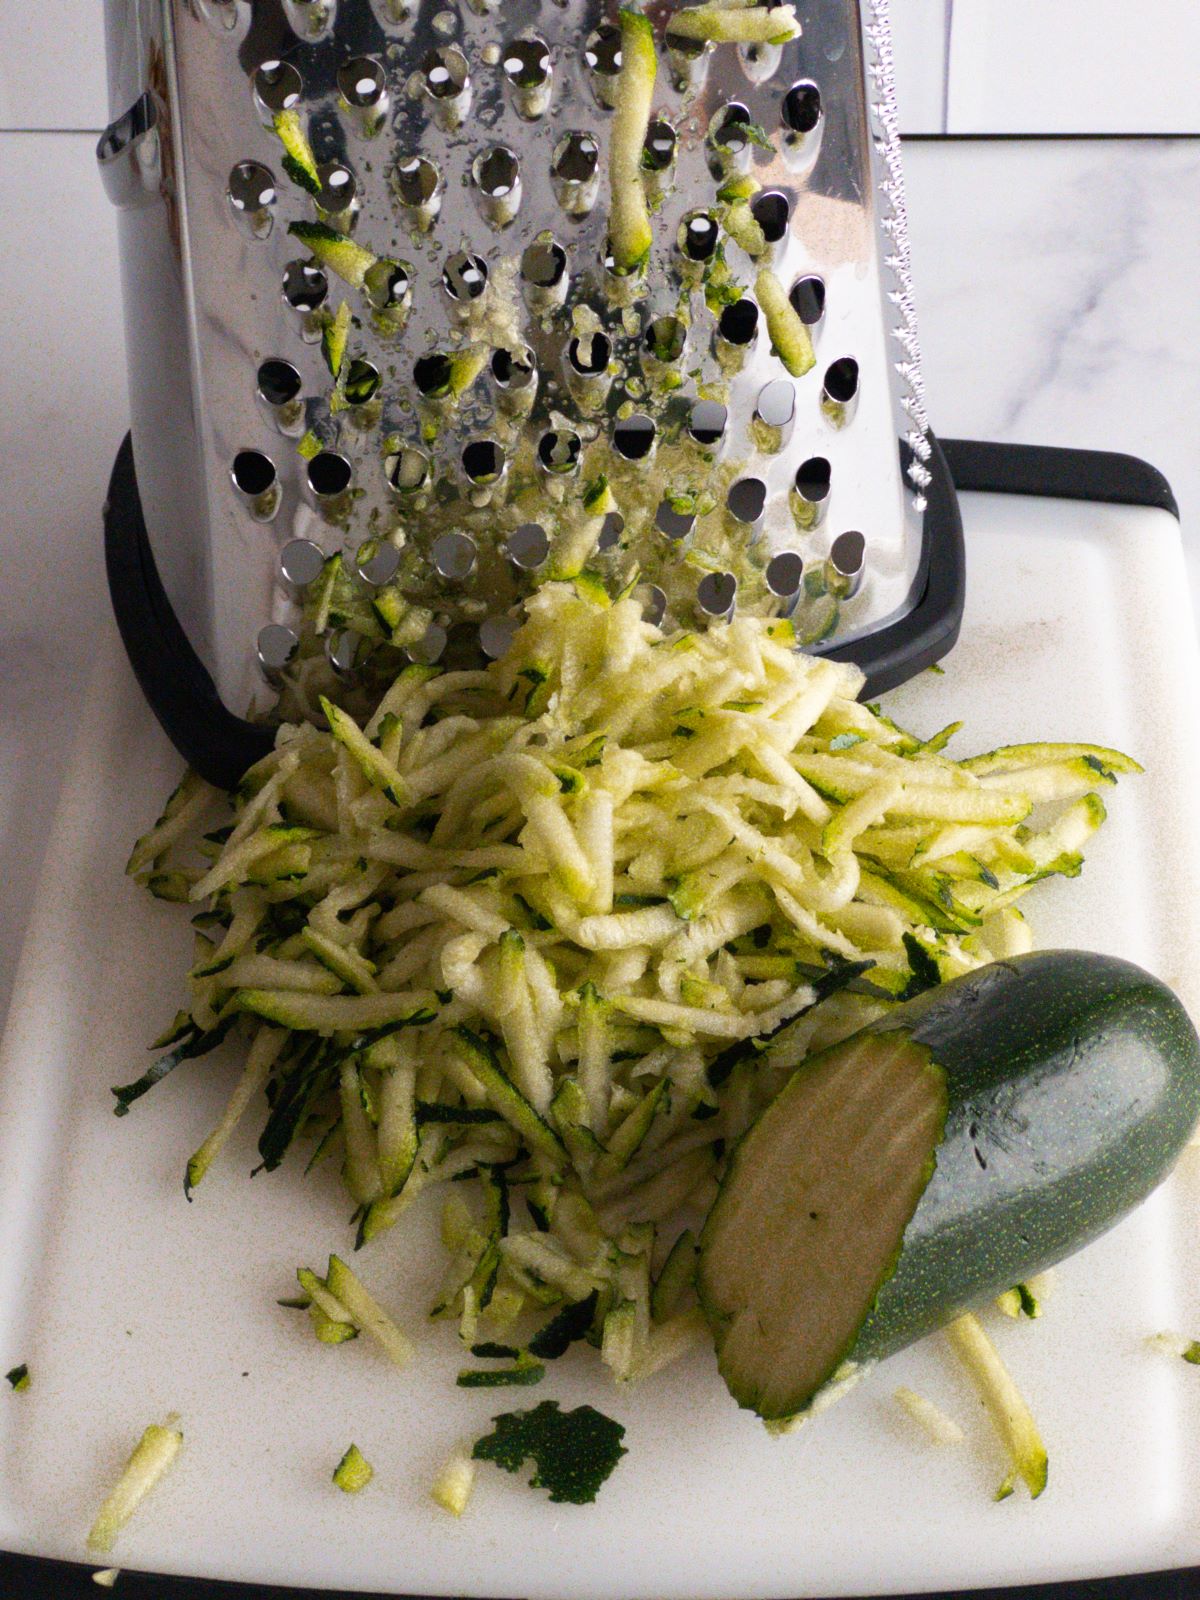 A zucchini being grated.